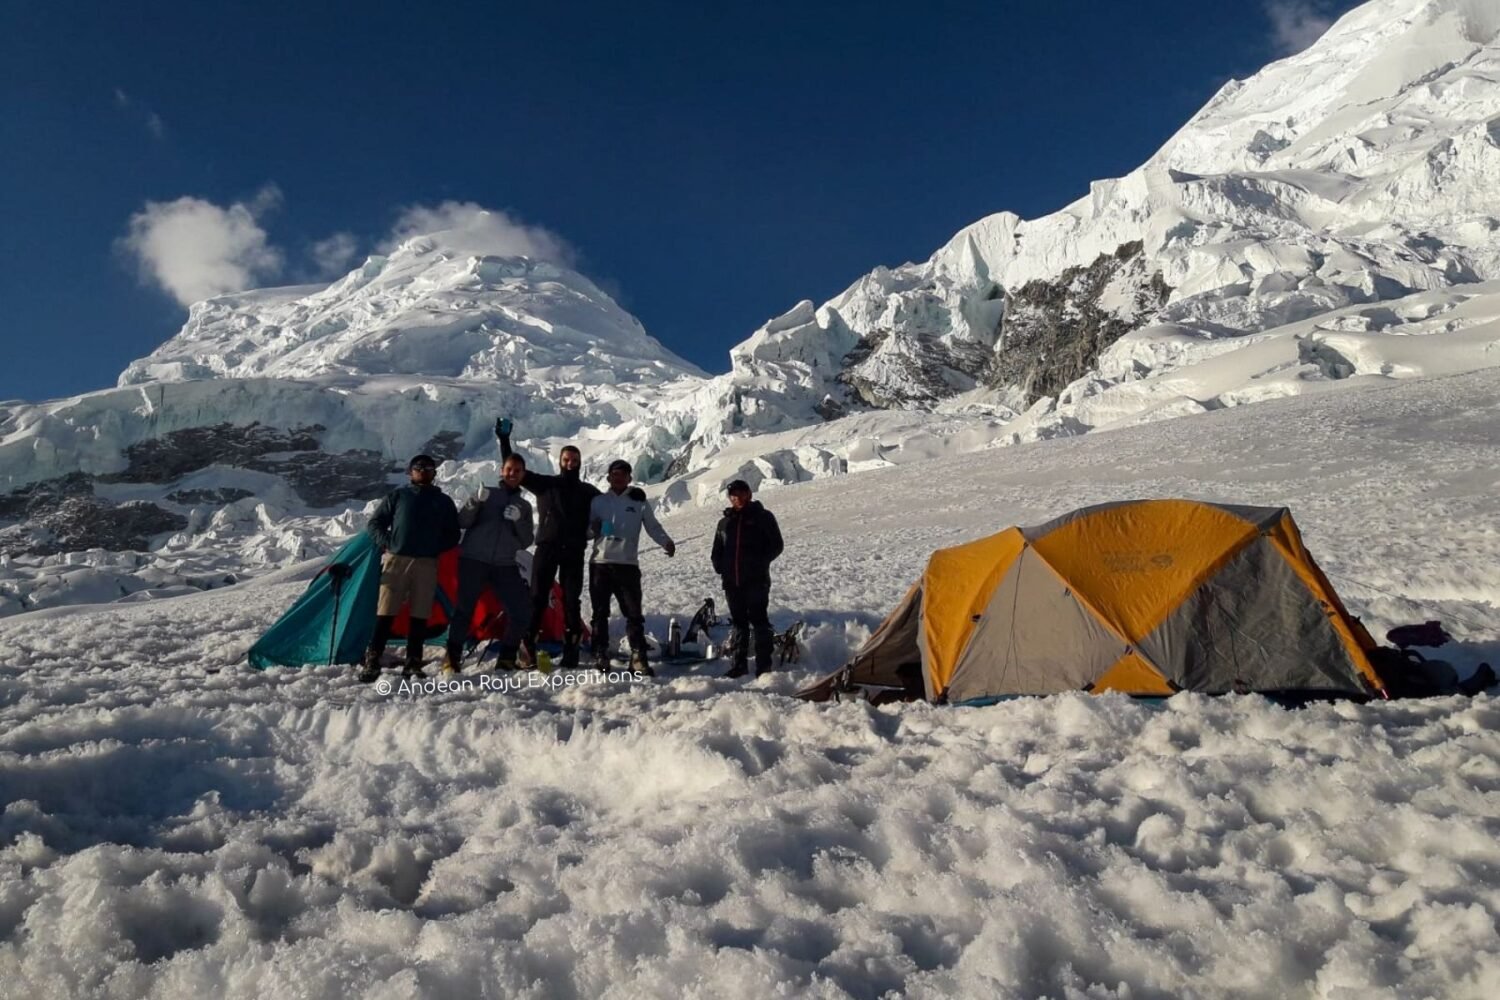 Our group camping in High Camp I